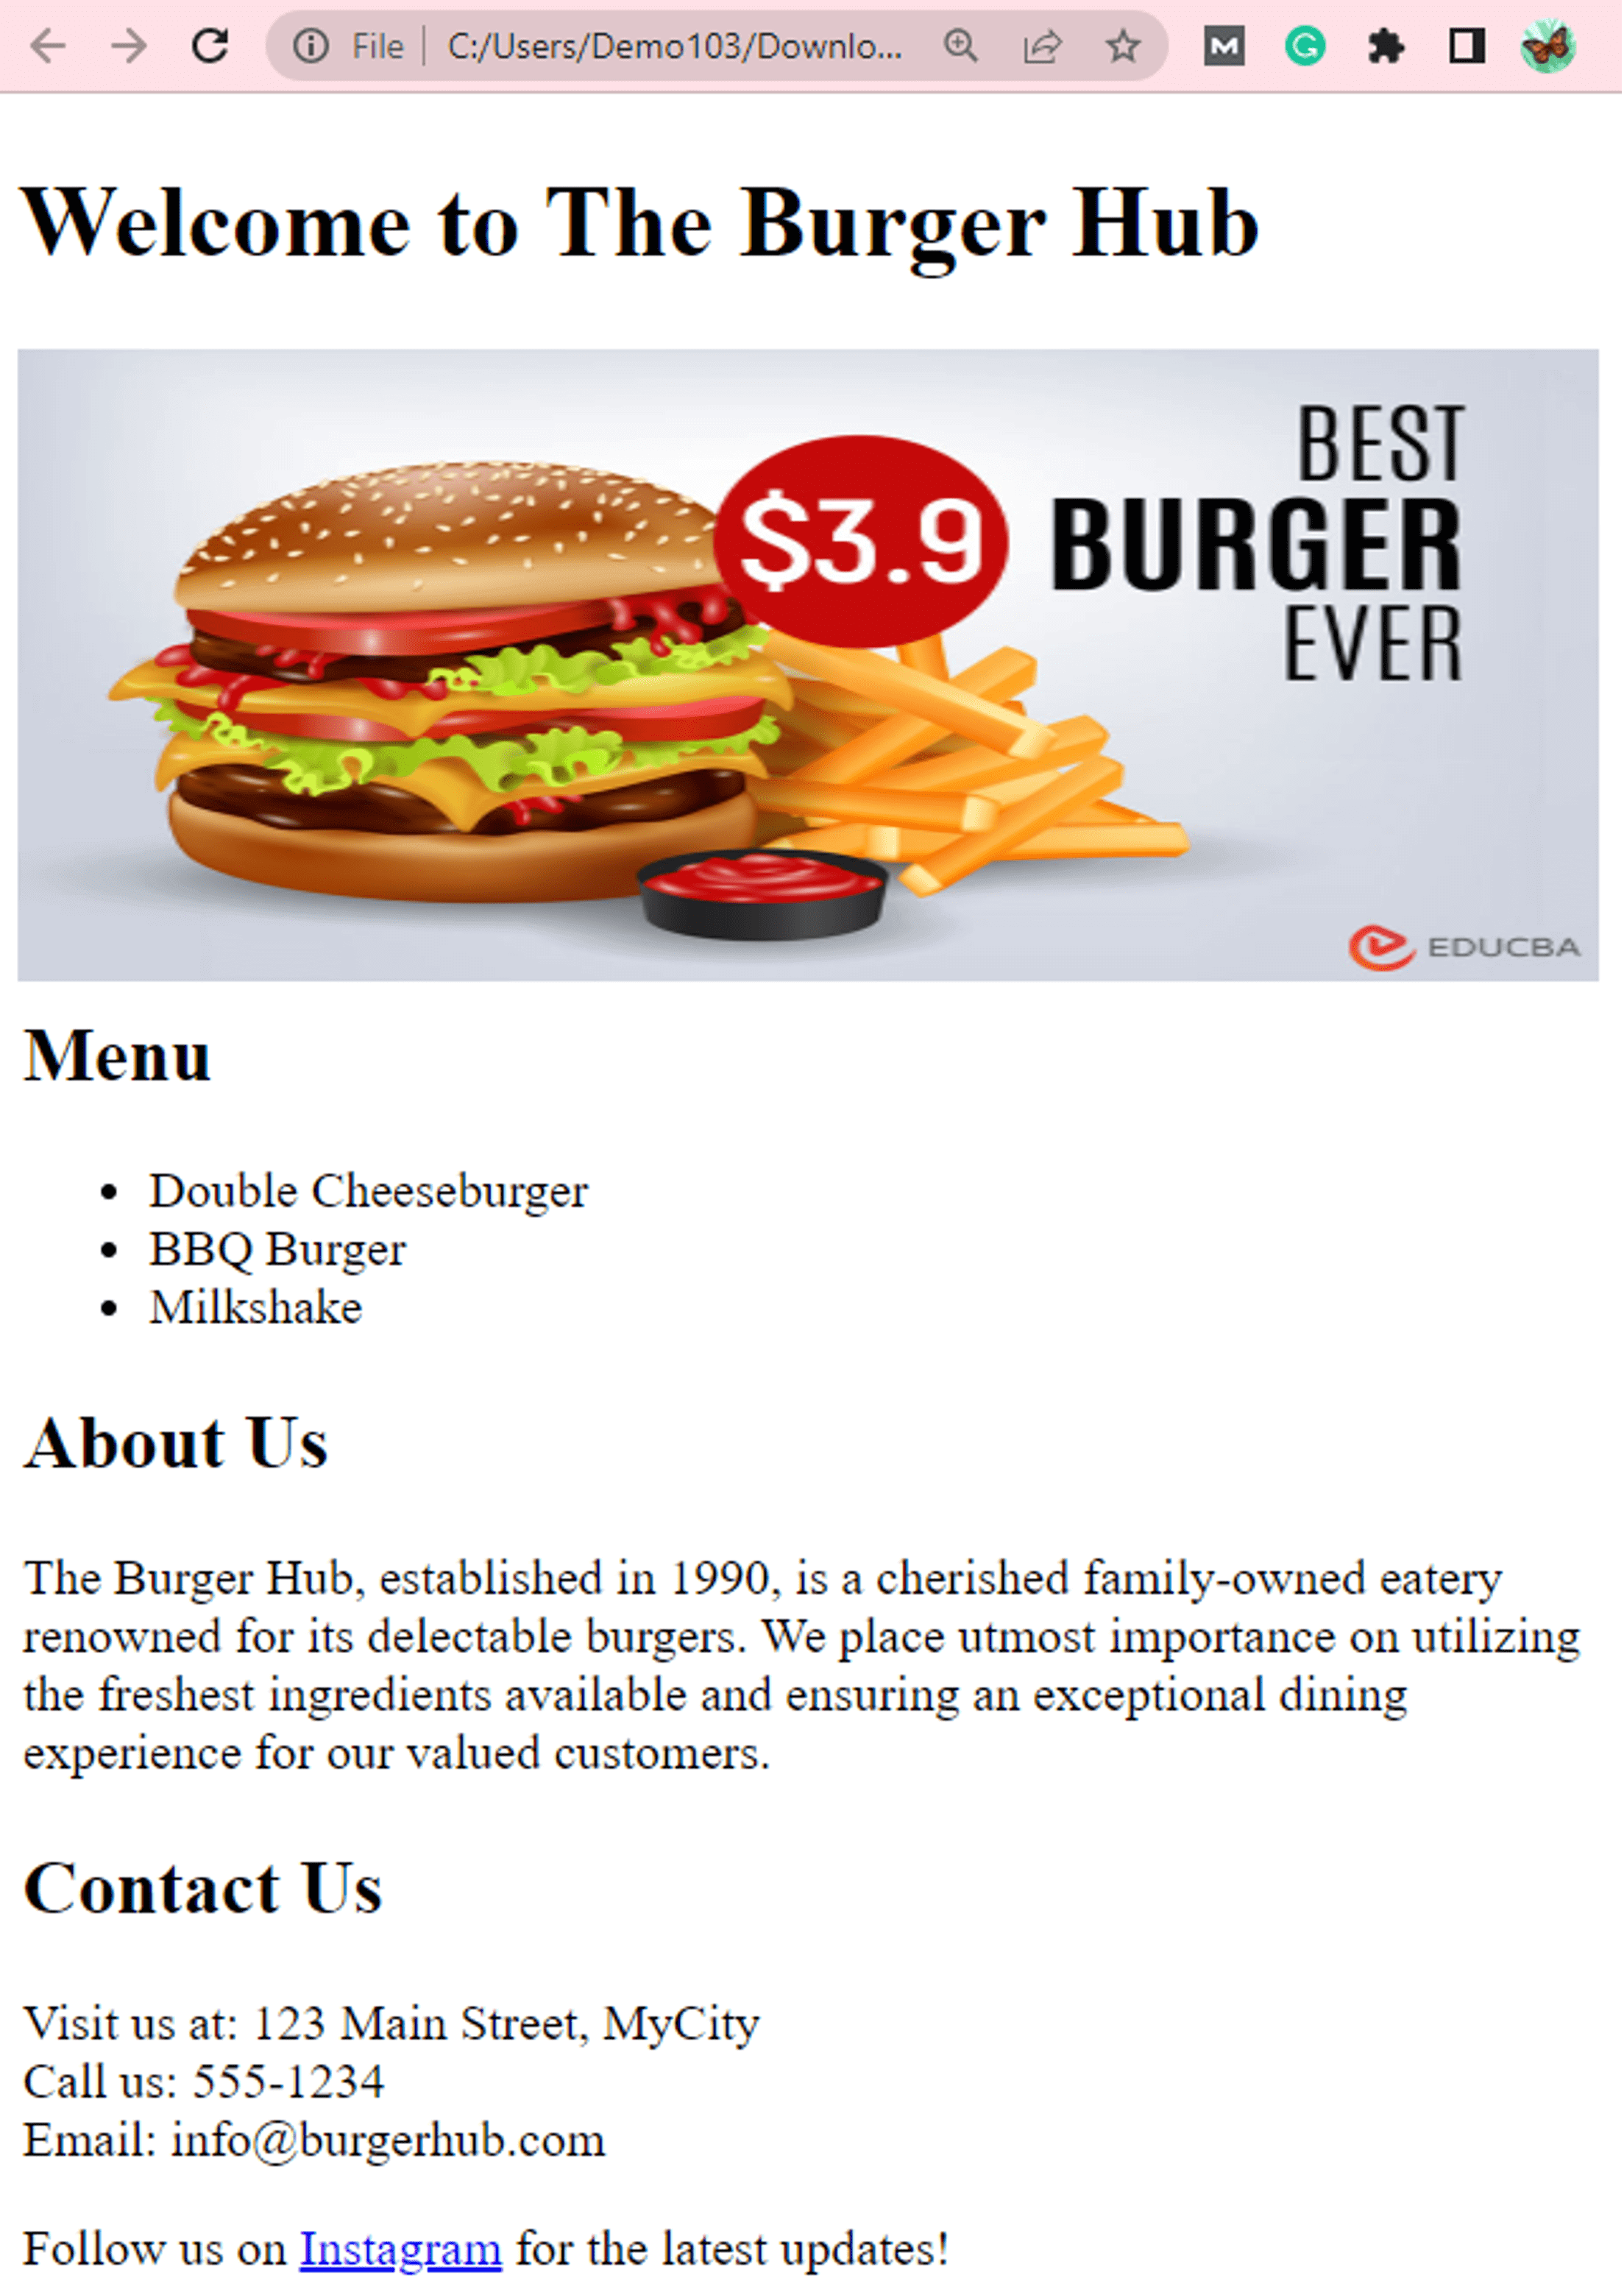 Basic HTML Tags- The Burger example